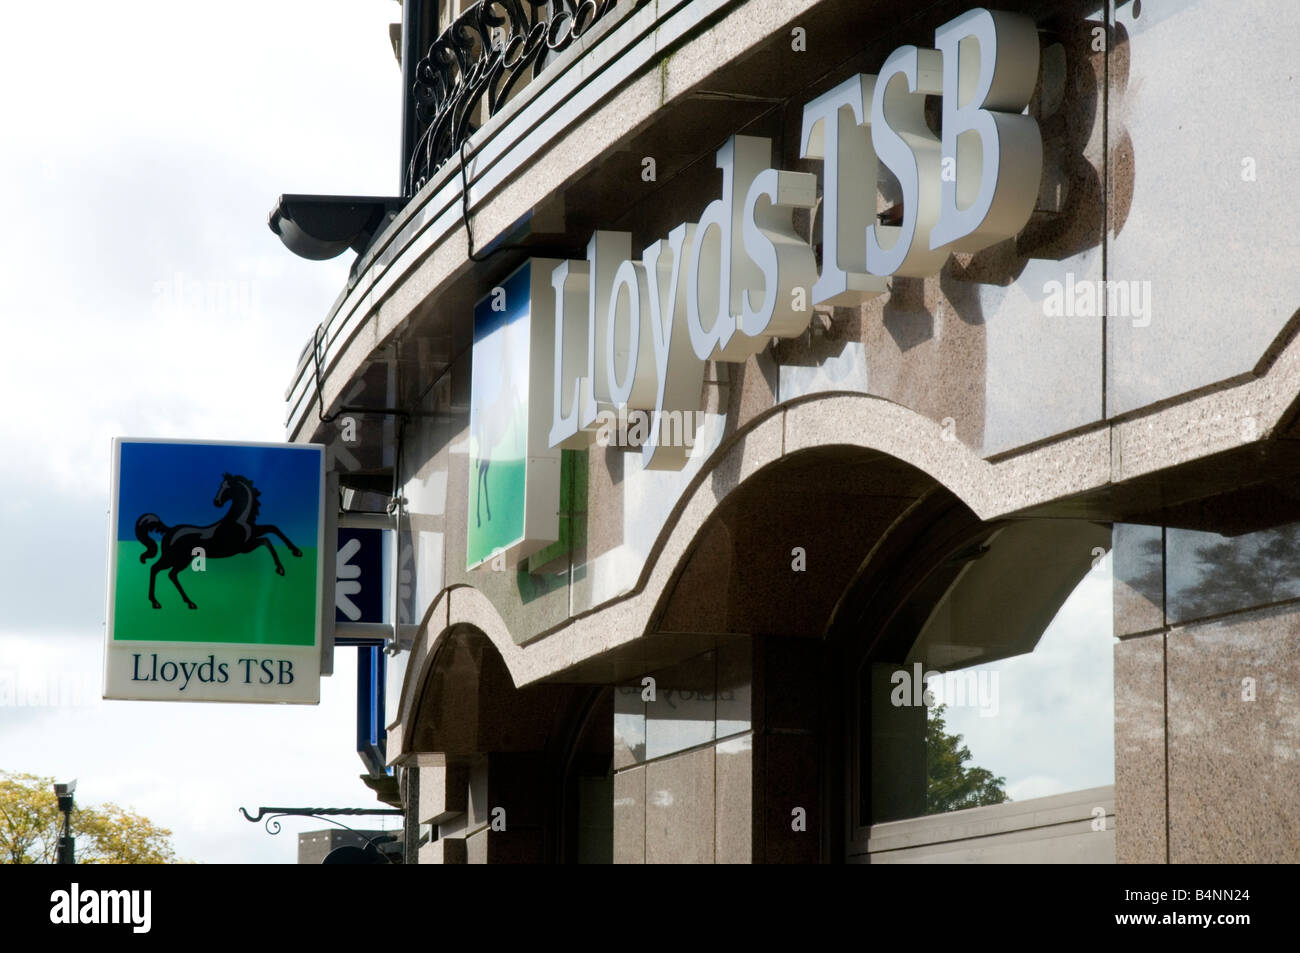 lloyds tsb bank high street bank black horse investments banking system uk banker bail out bailed out money branch Stock Photo